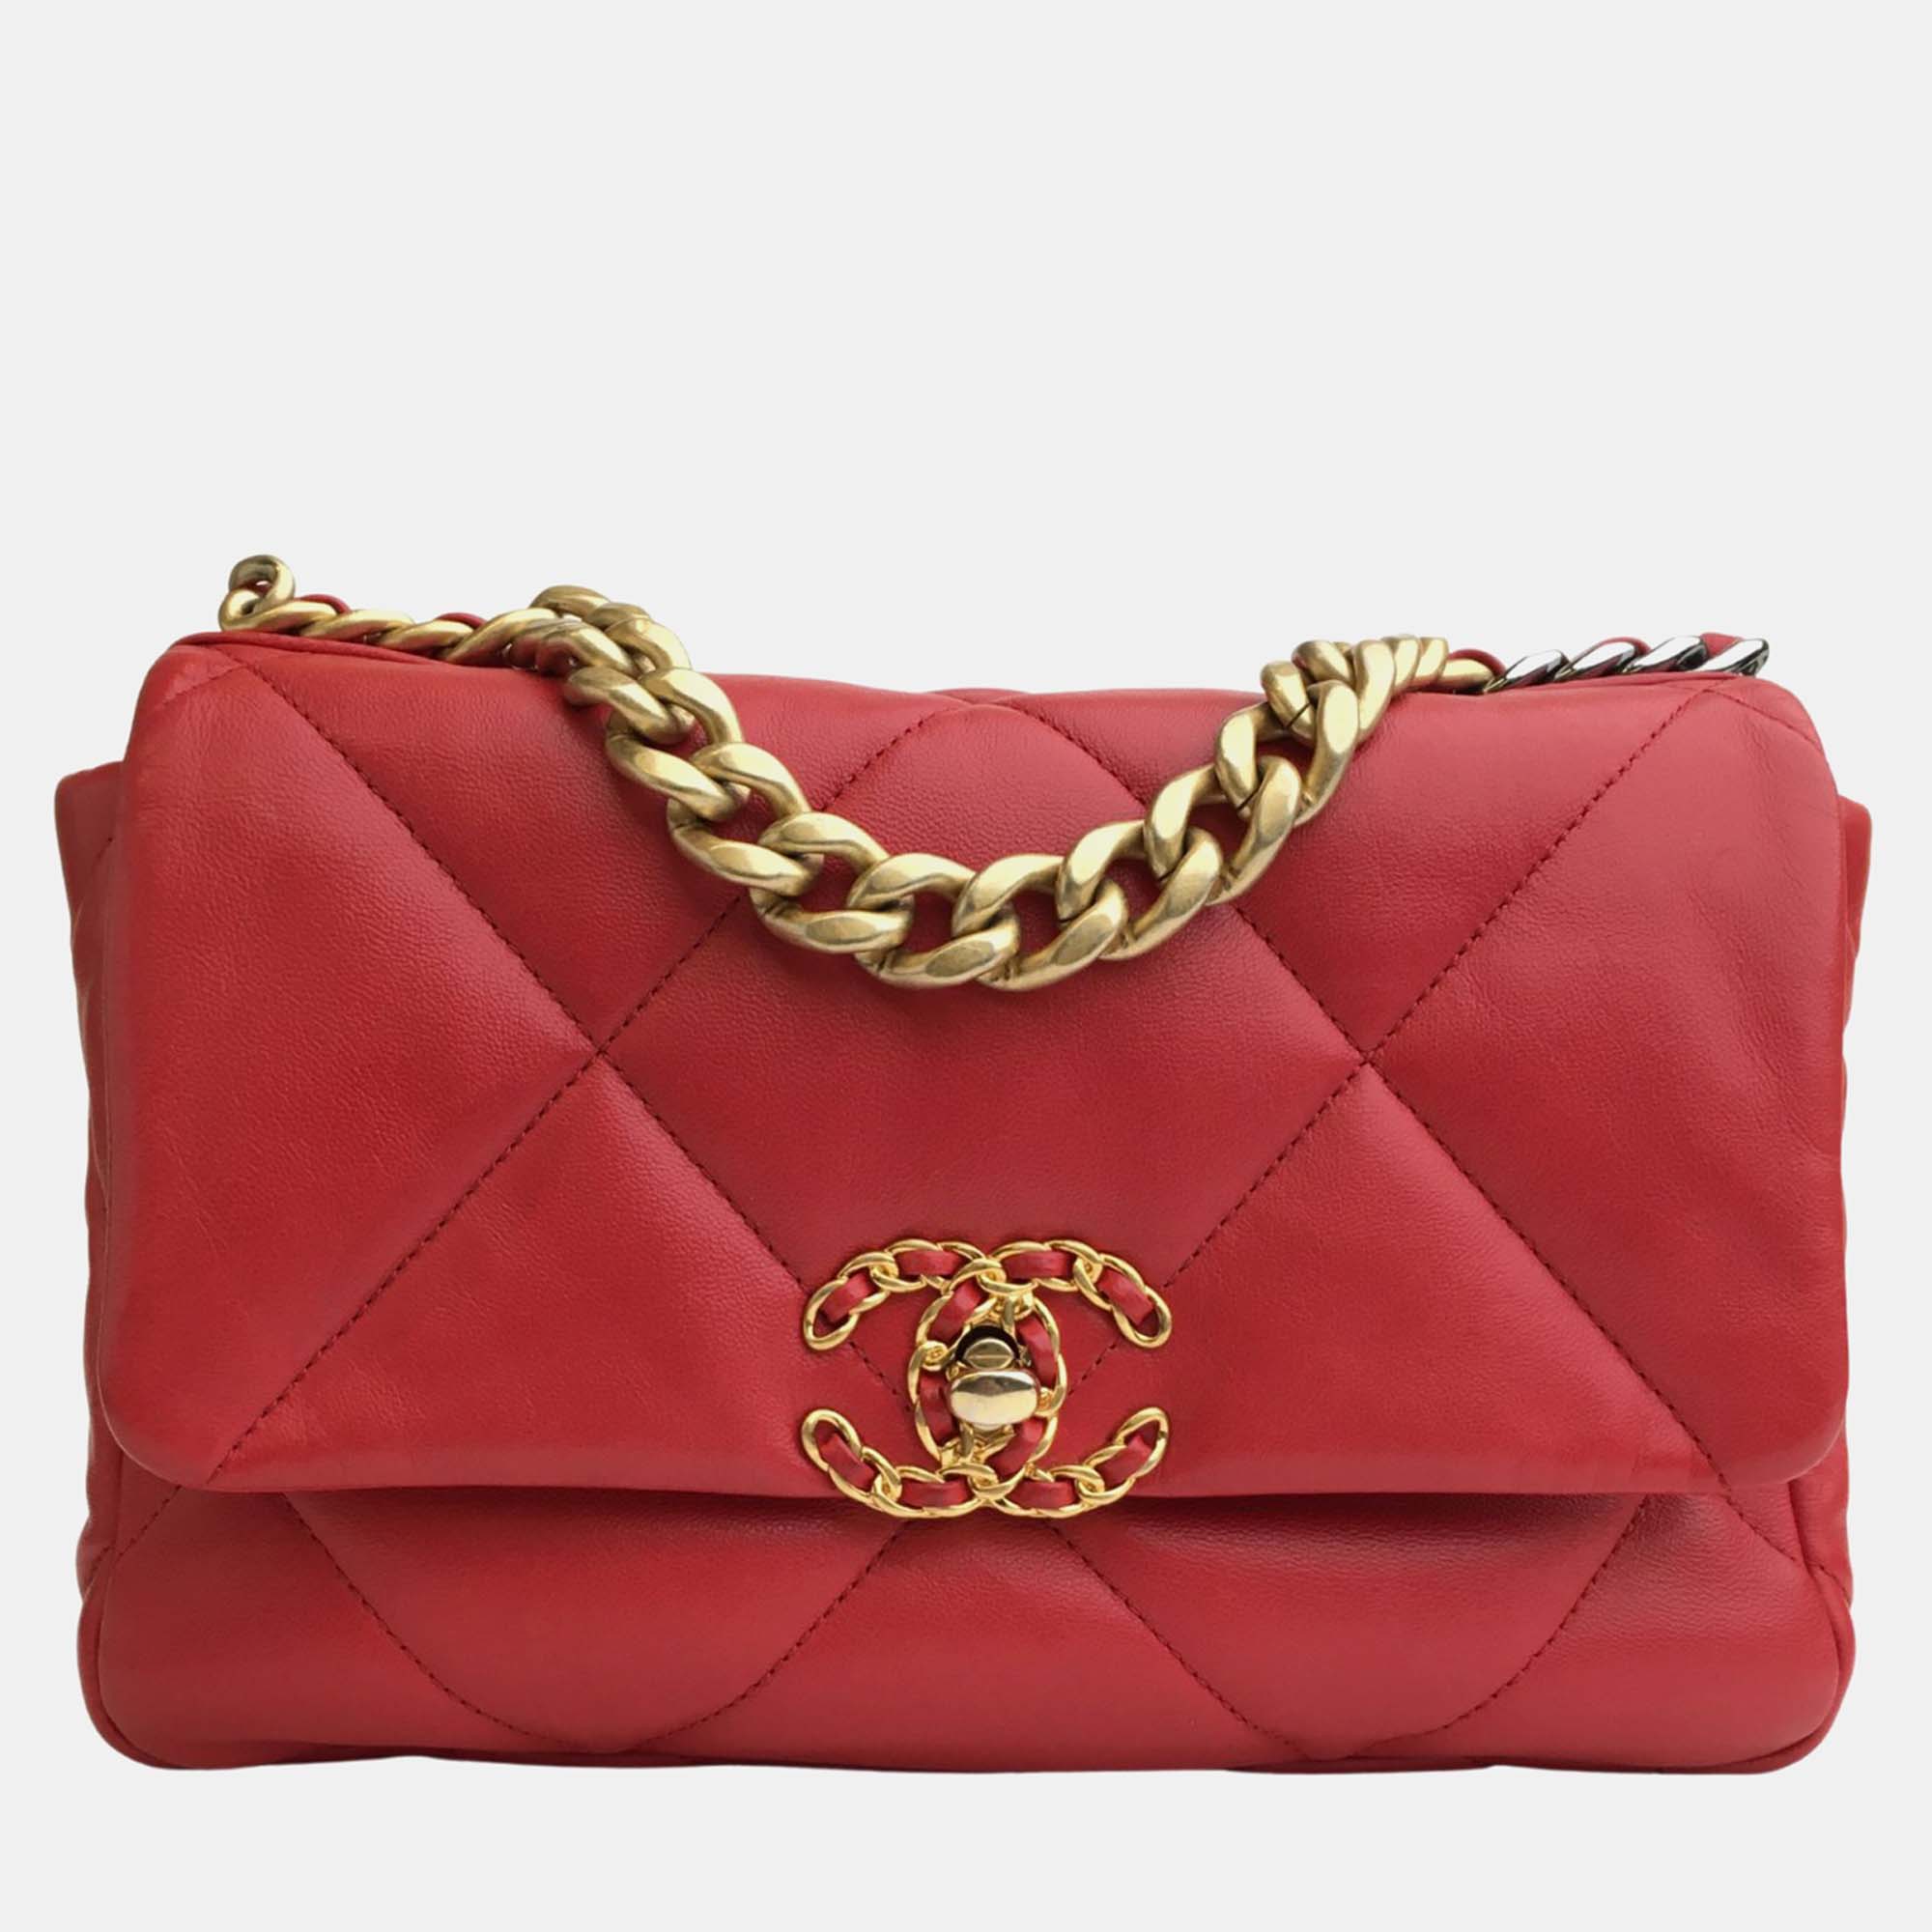 Chanel red leather small 19 shoulder bags